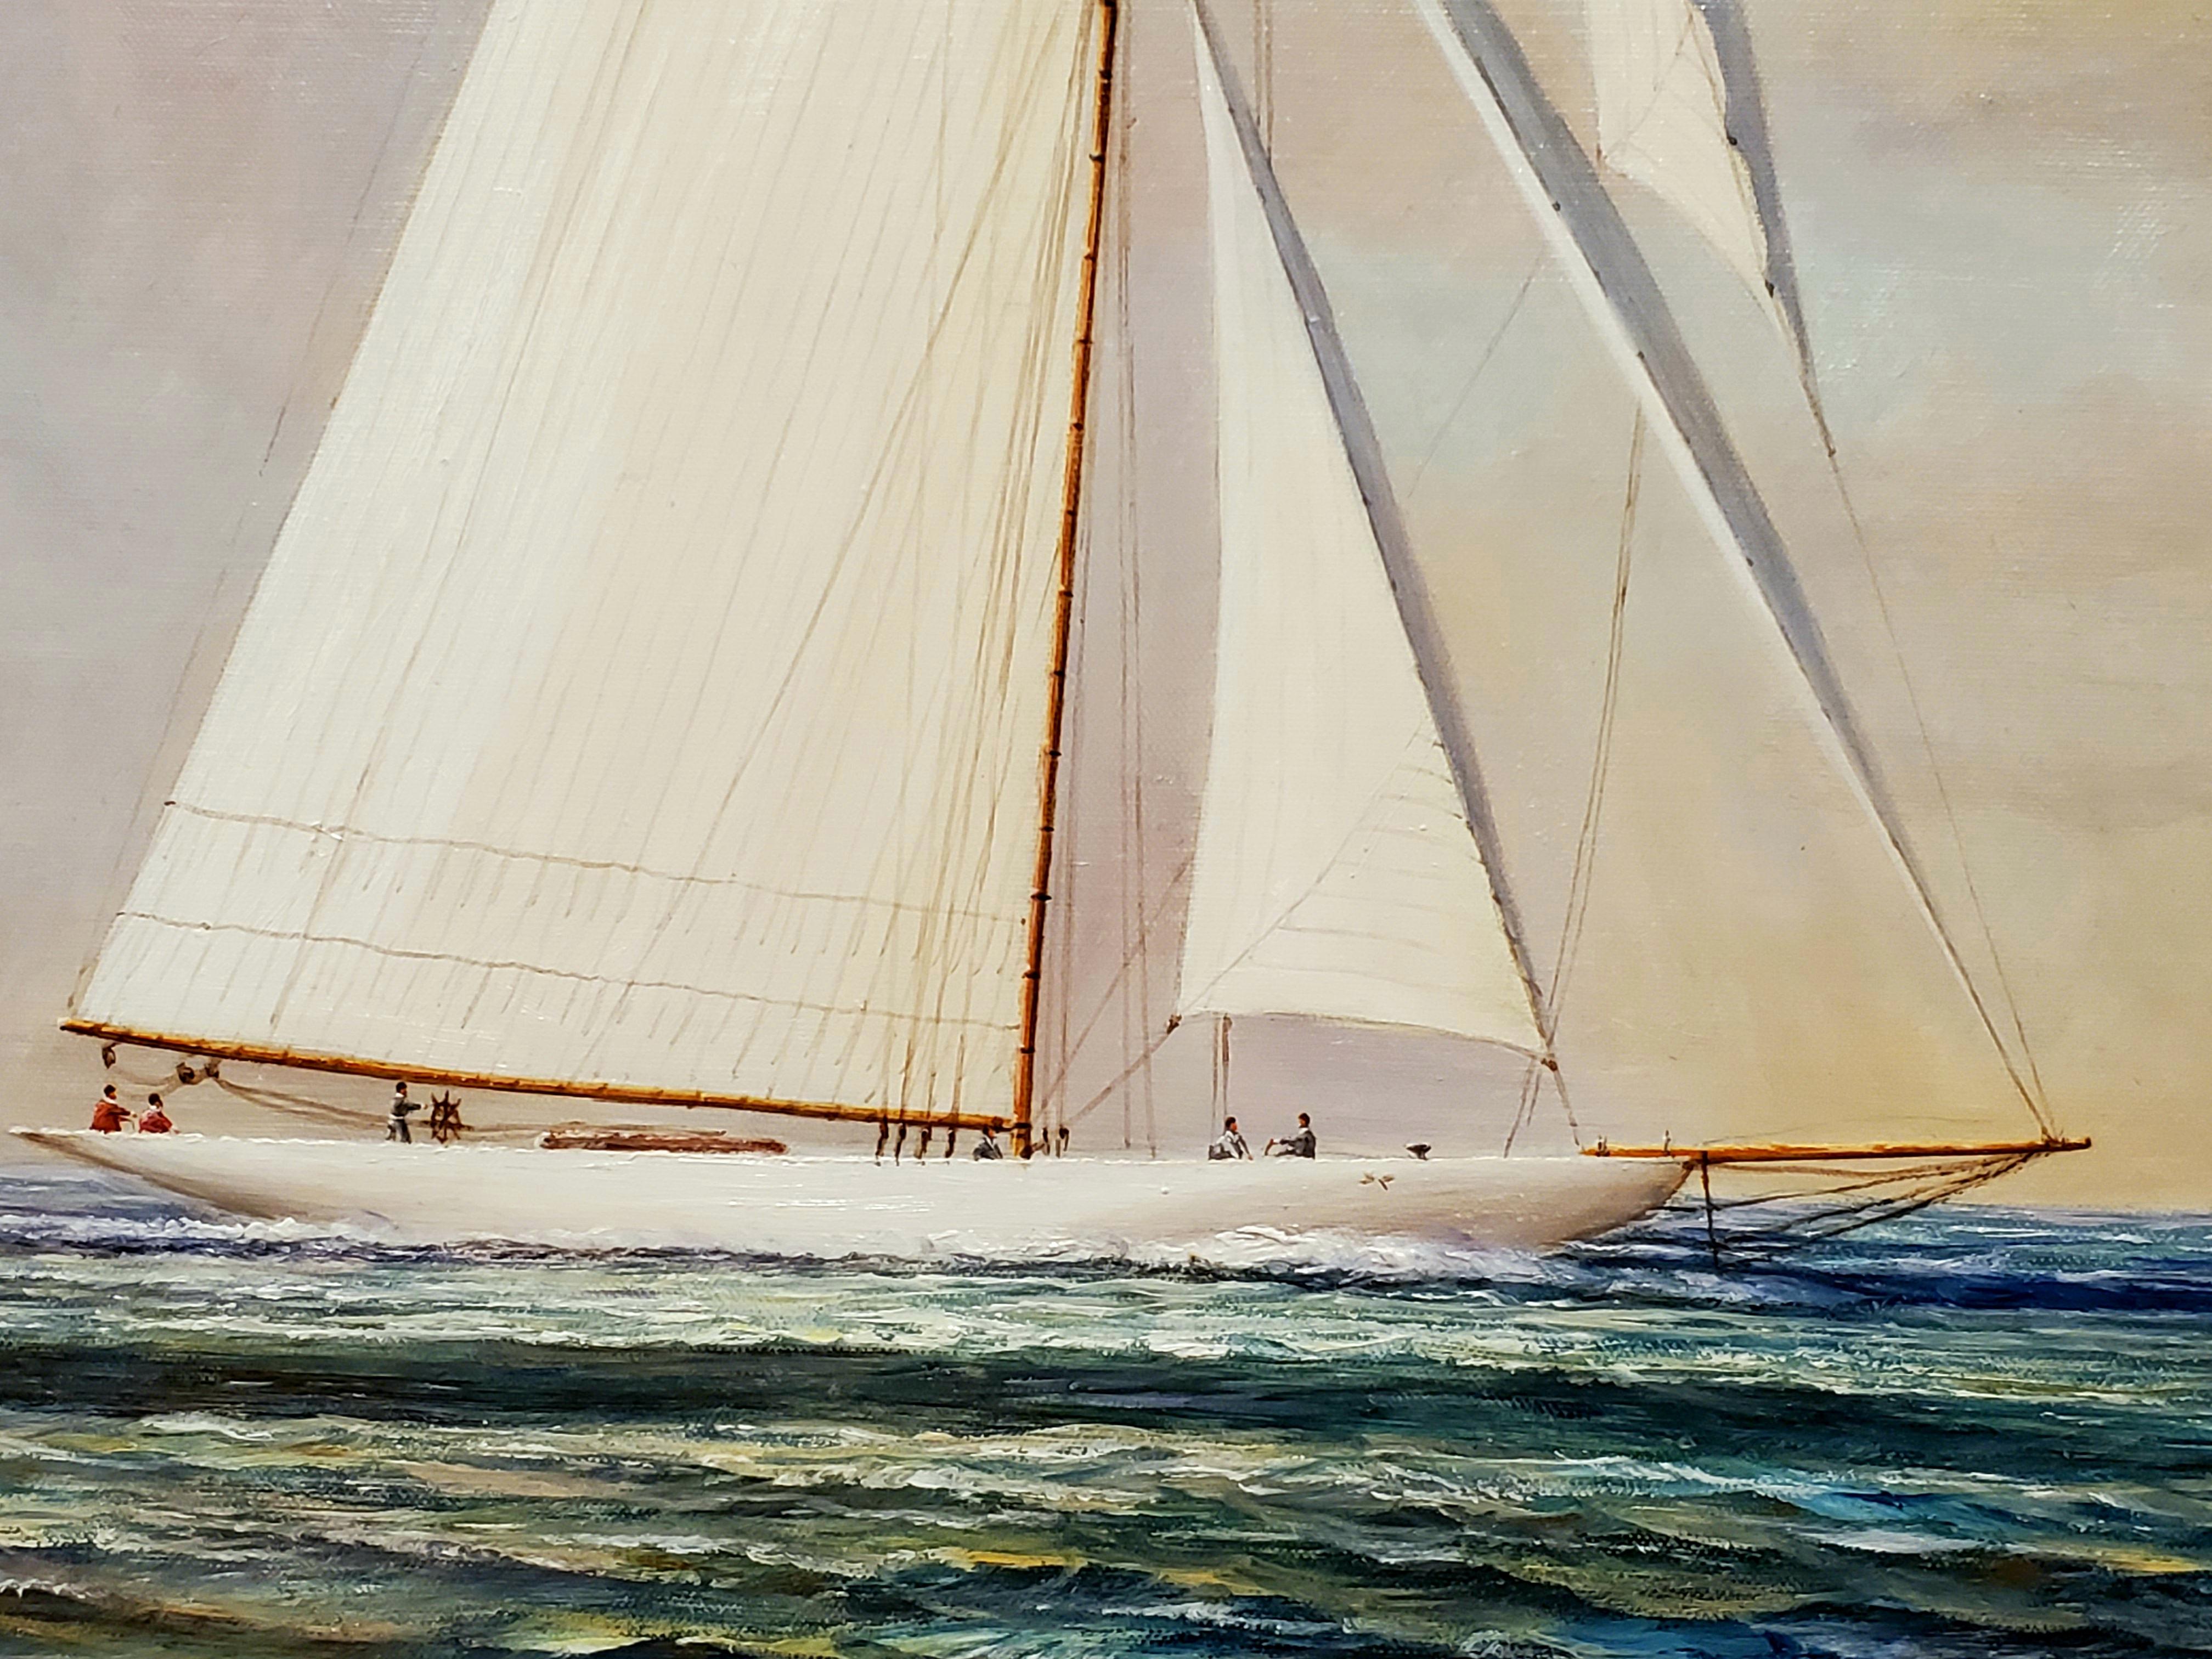 Square Painting of Sailboats At Sea by D. Tayler. 

D. Tayler is a is a well-known American marine artist from Massachusetts. 

Tayler is known for his pristine sailboat art. 

This nautical painting is oil on canvas and measures 36 inches wide by